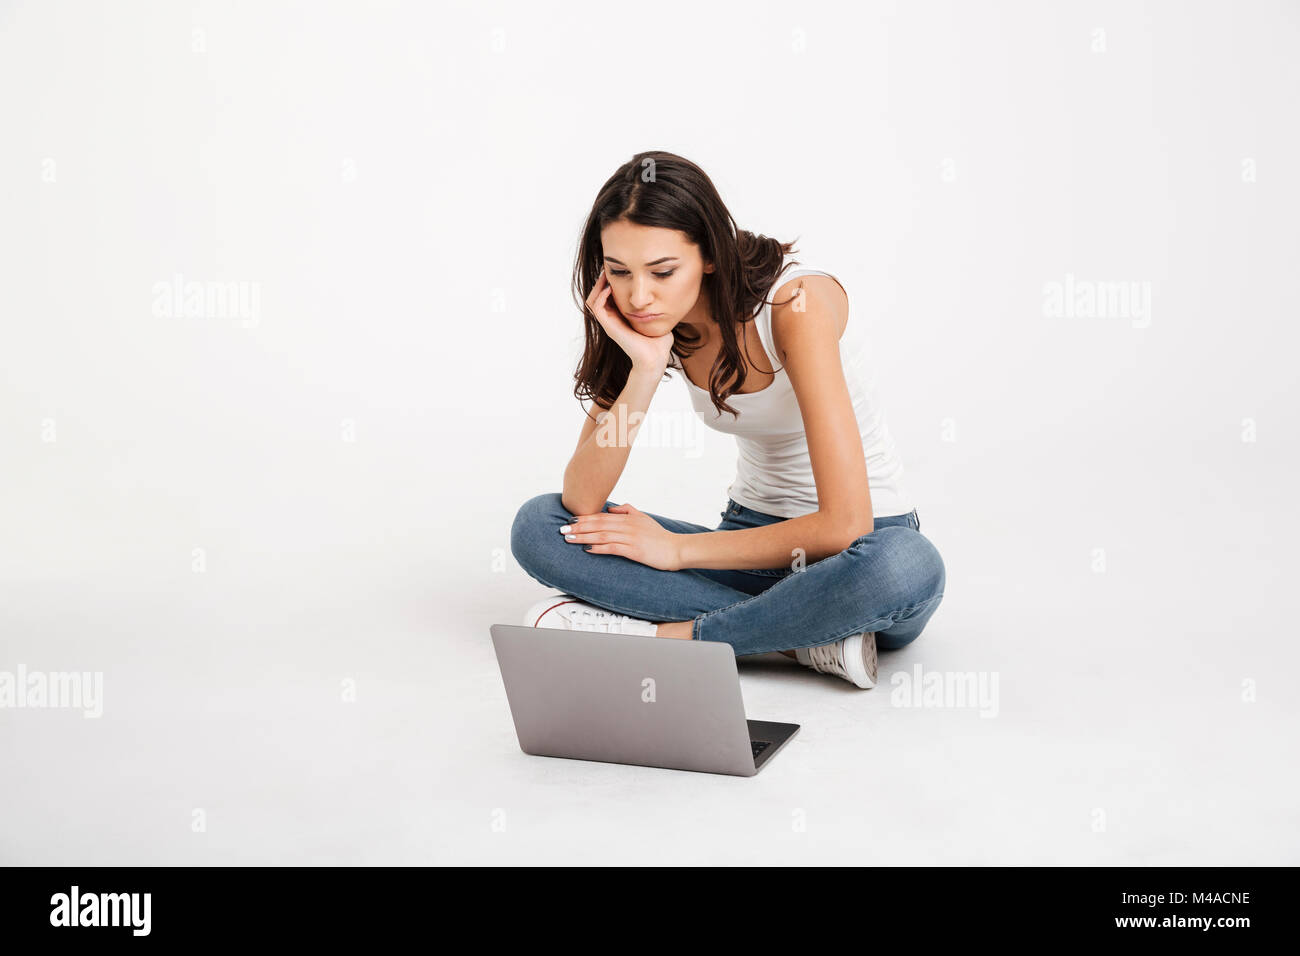 Portrait of a tired girl dressed in tank-top holding laptop while sitting on the floor isolated over white background Stock Photo